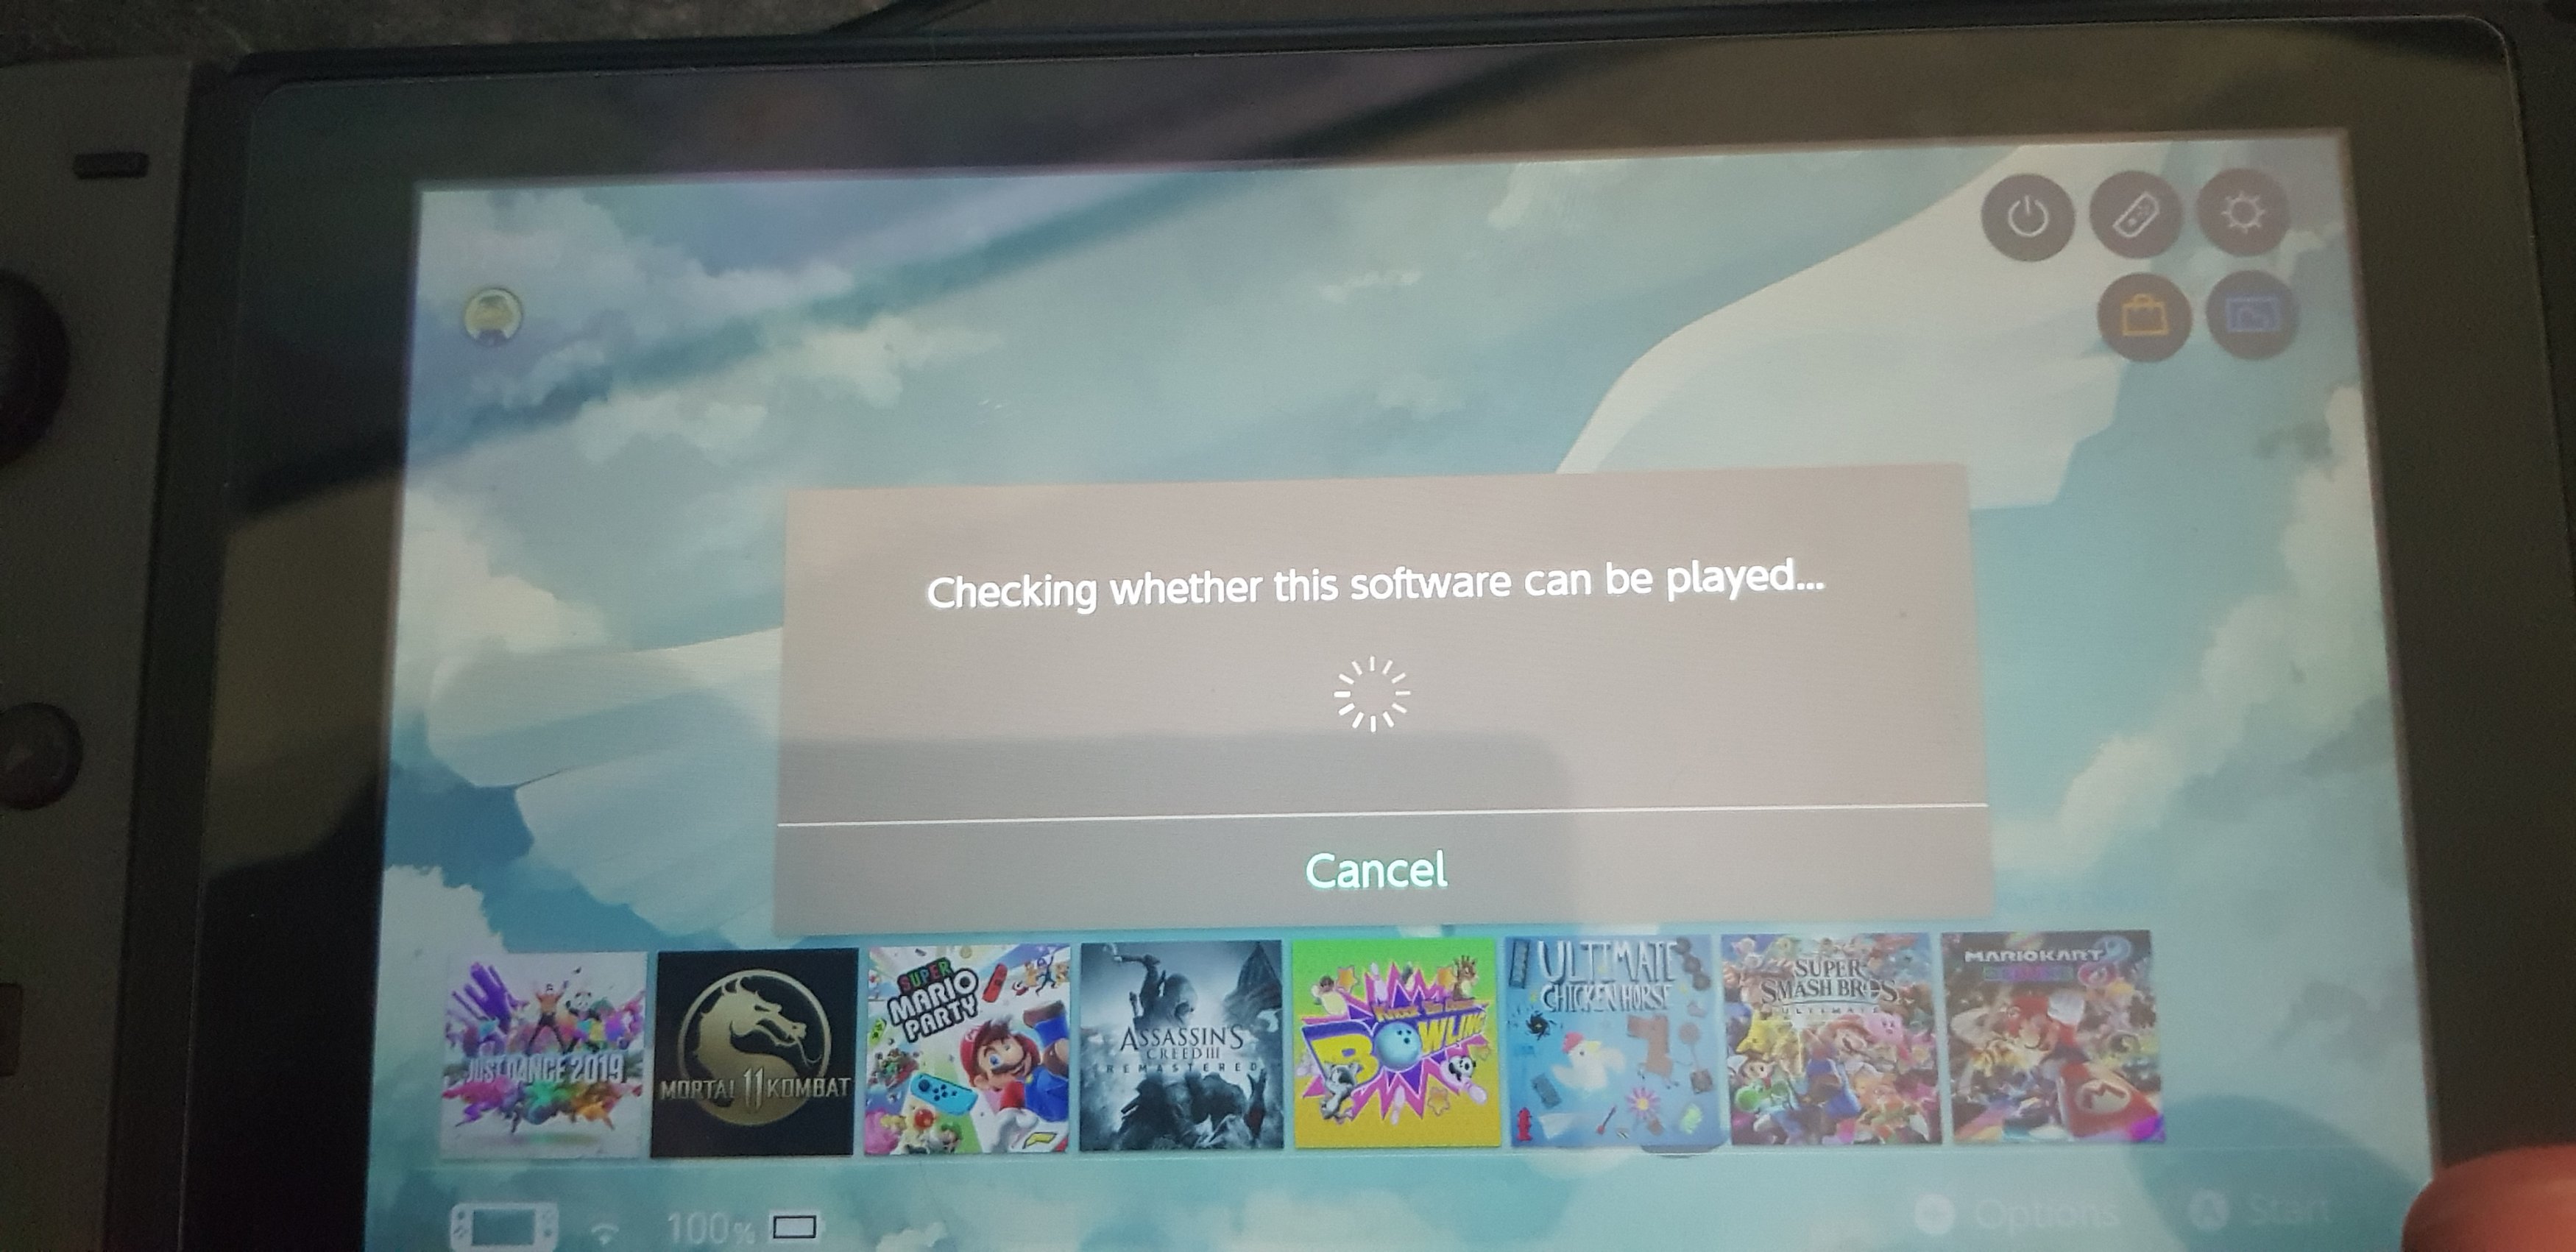 Learn how to play Nintendo Switch online without getting banned — Eightify